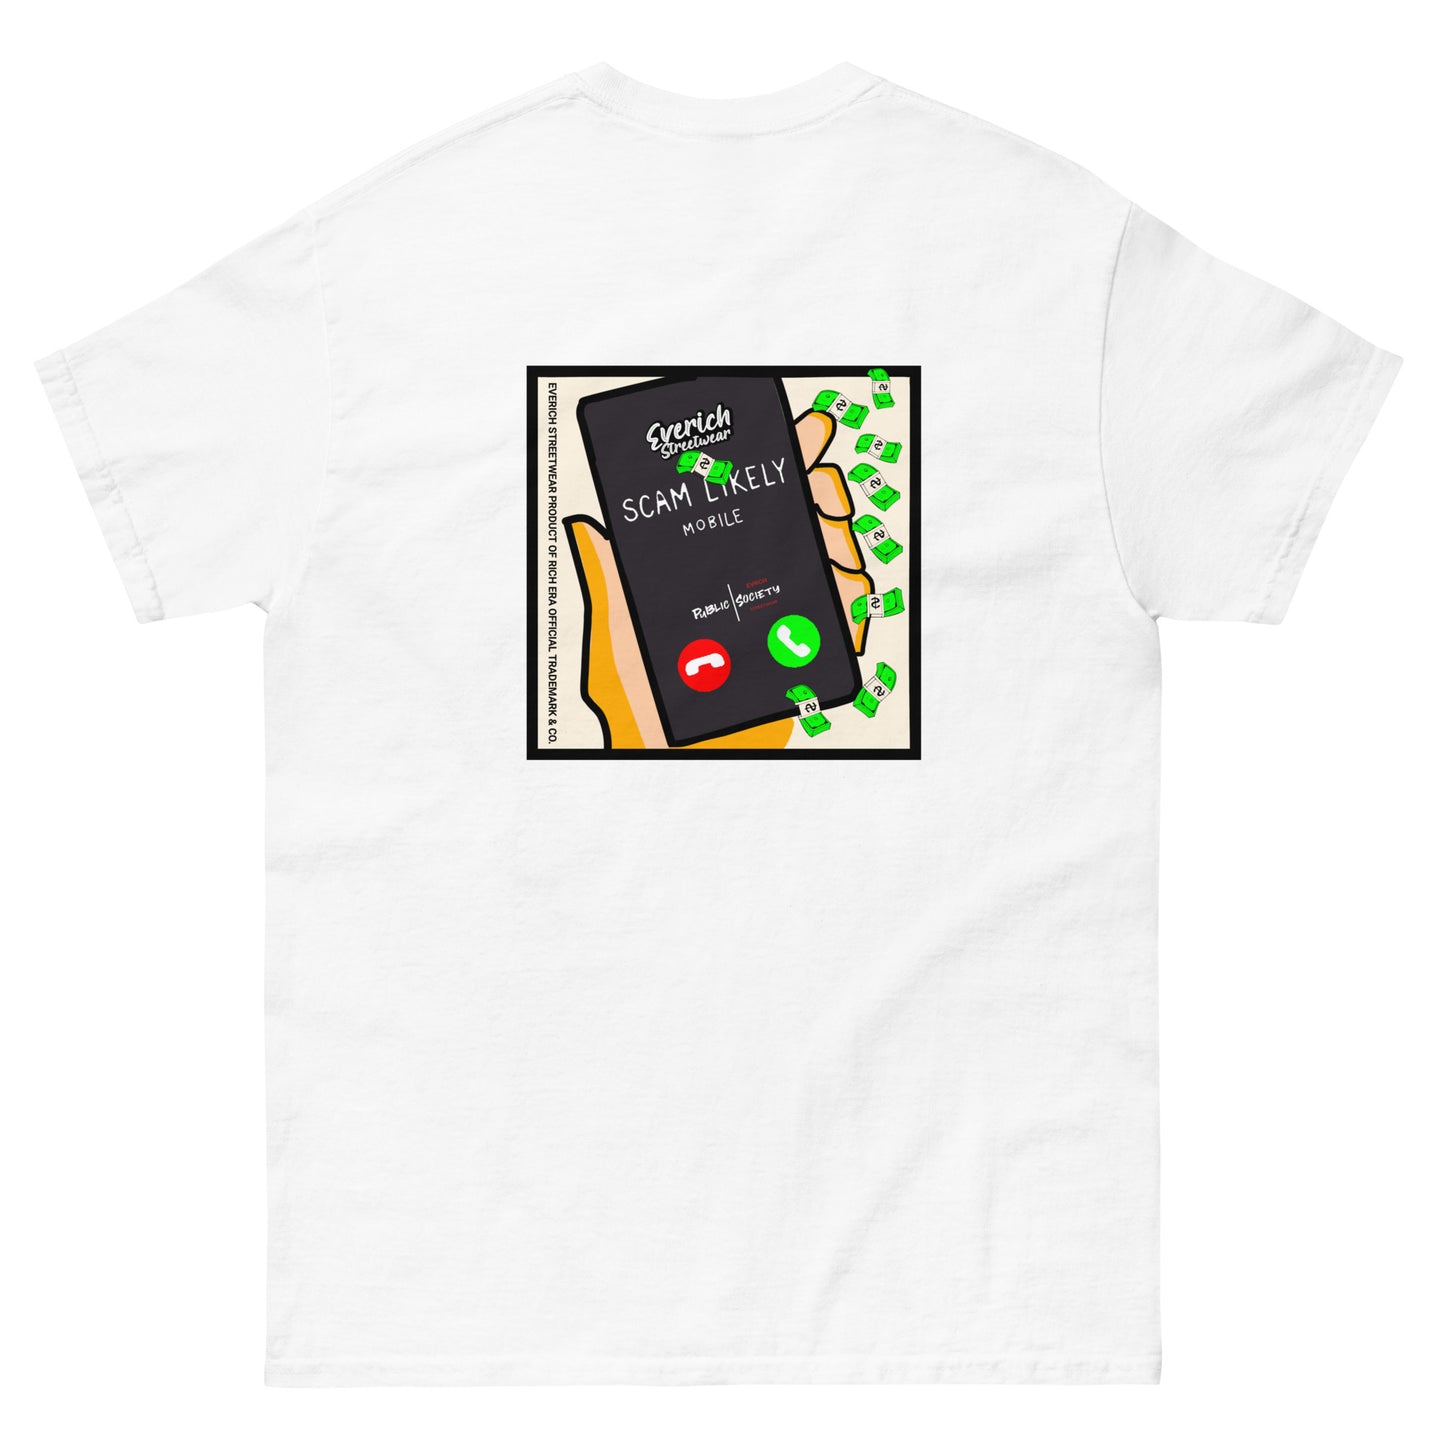 Scam Likely Tshirts